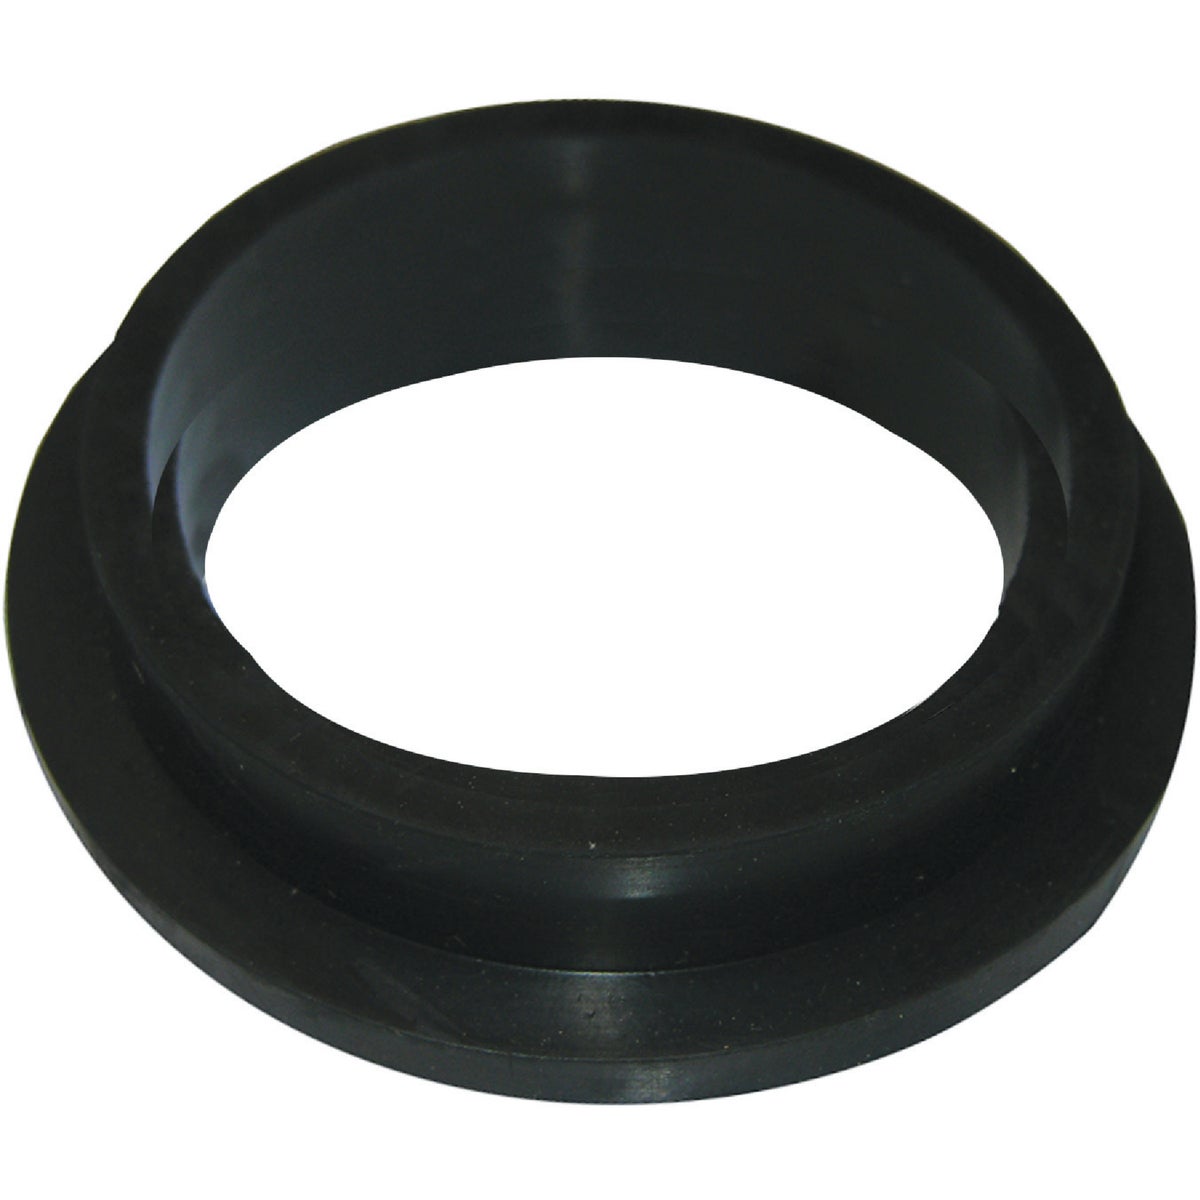 Lasco 1 In. Black Rubber Toilet Spud Flanged Washer 